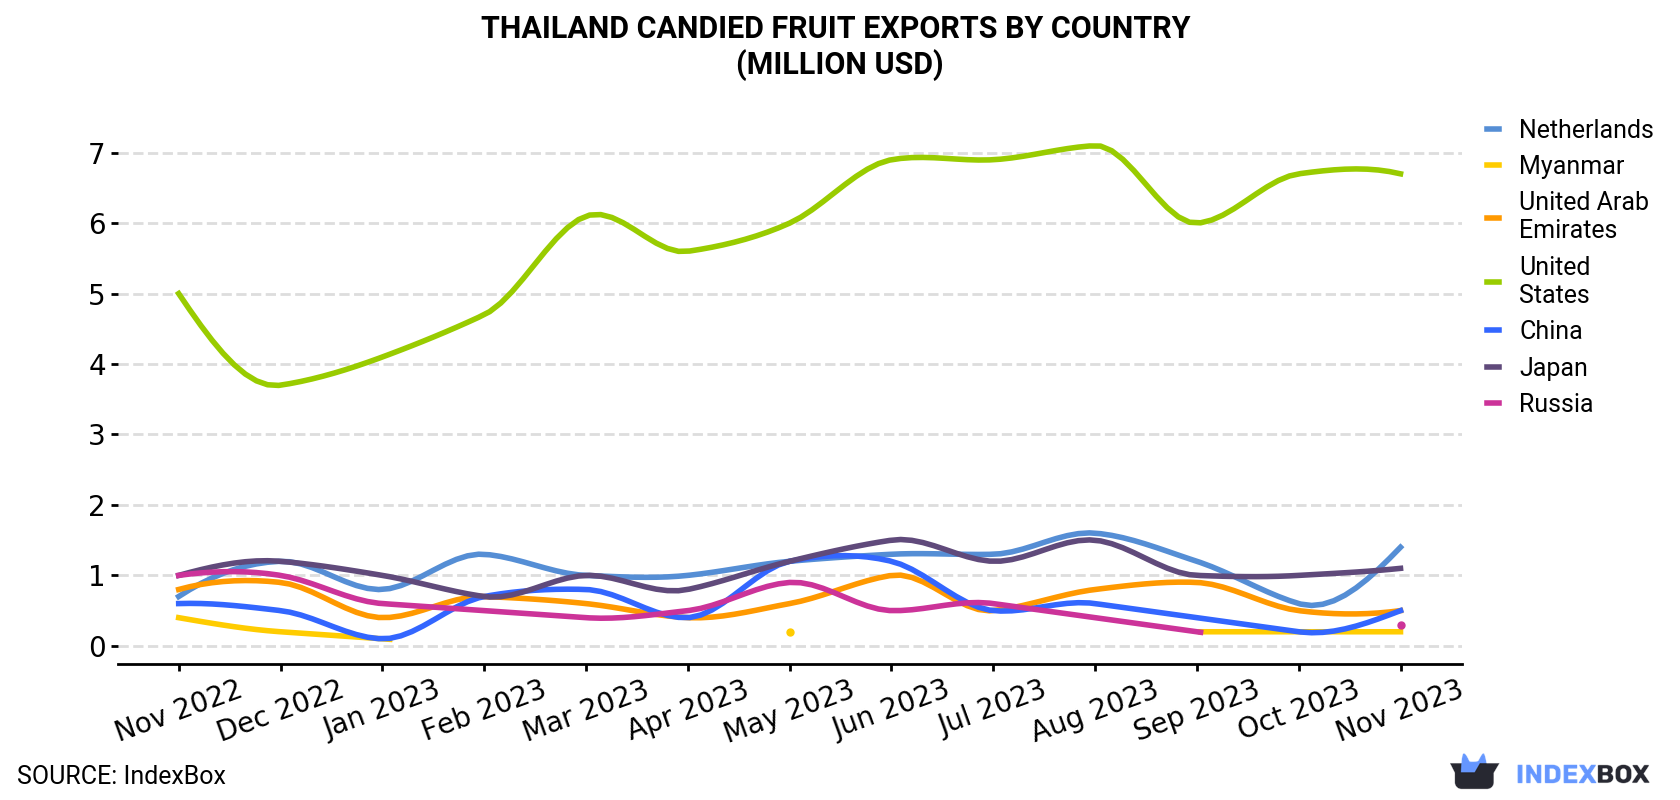 Thailand Candied Fruit Exports By Country (Million USD)